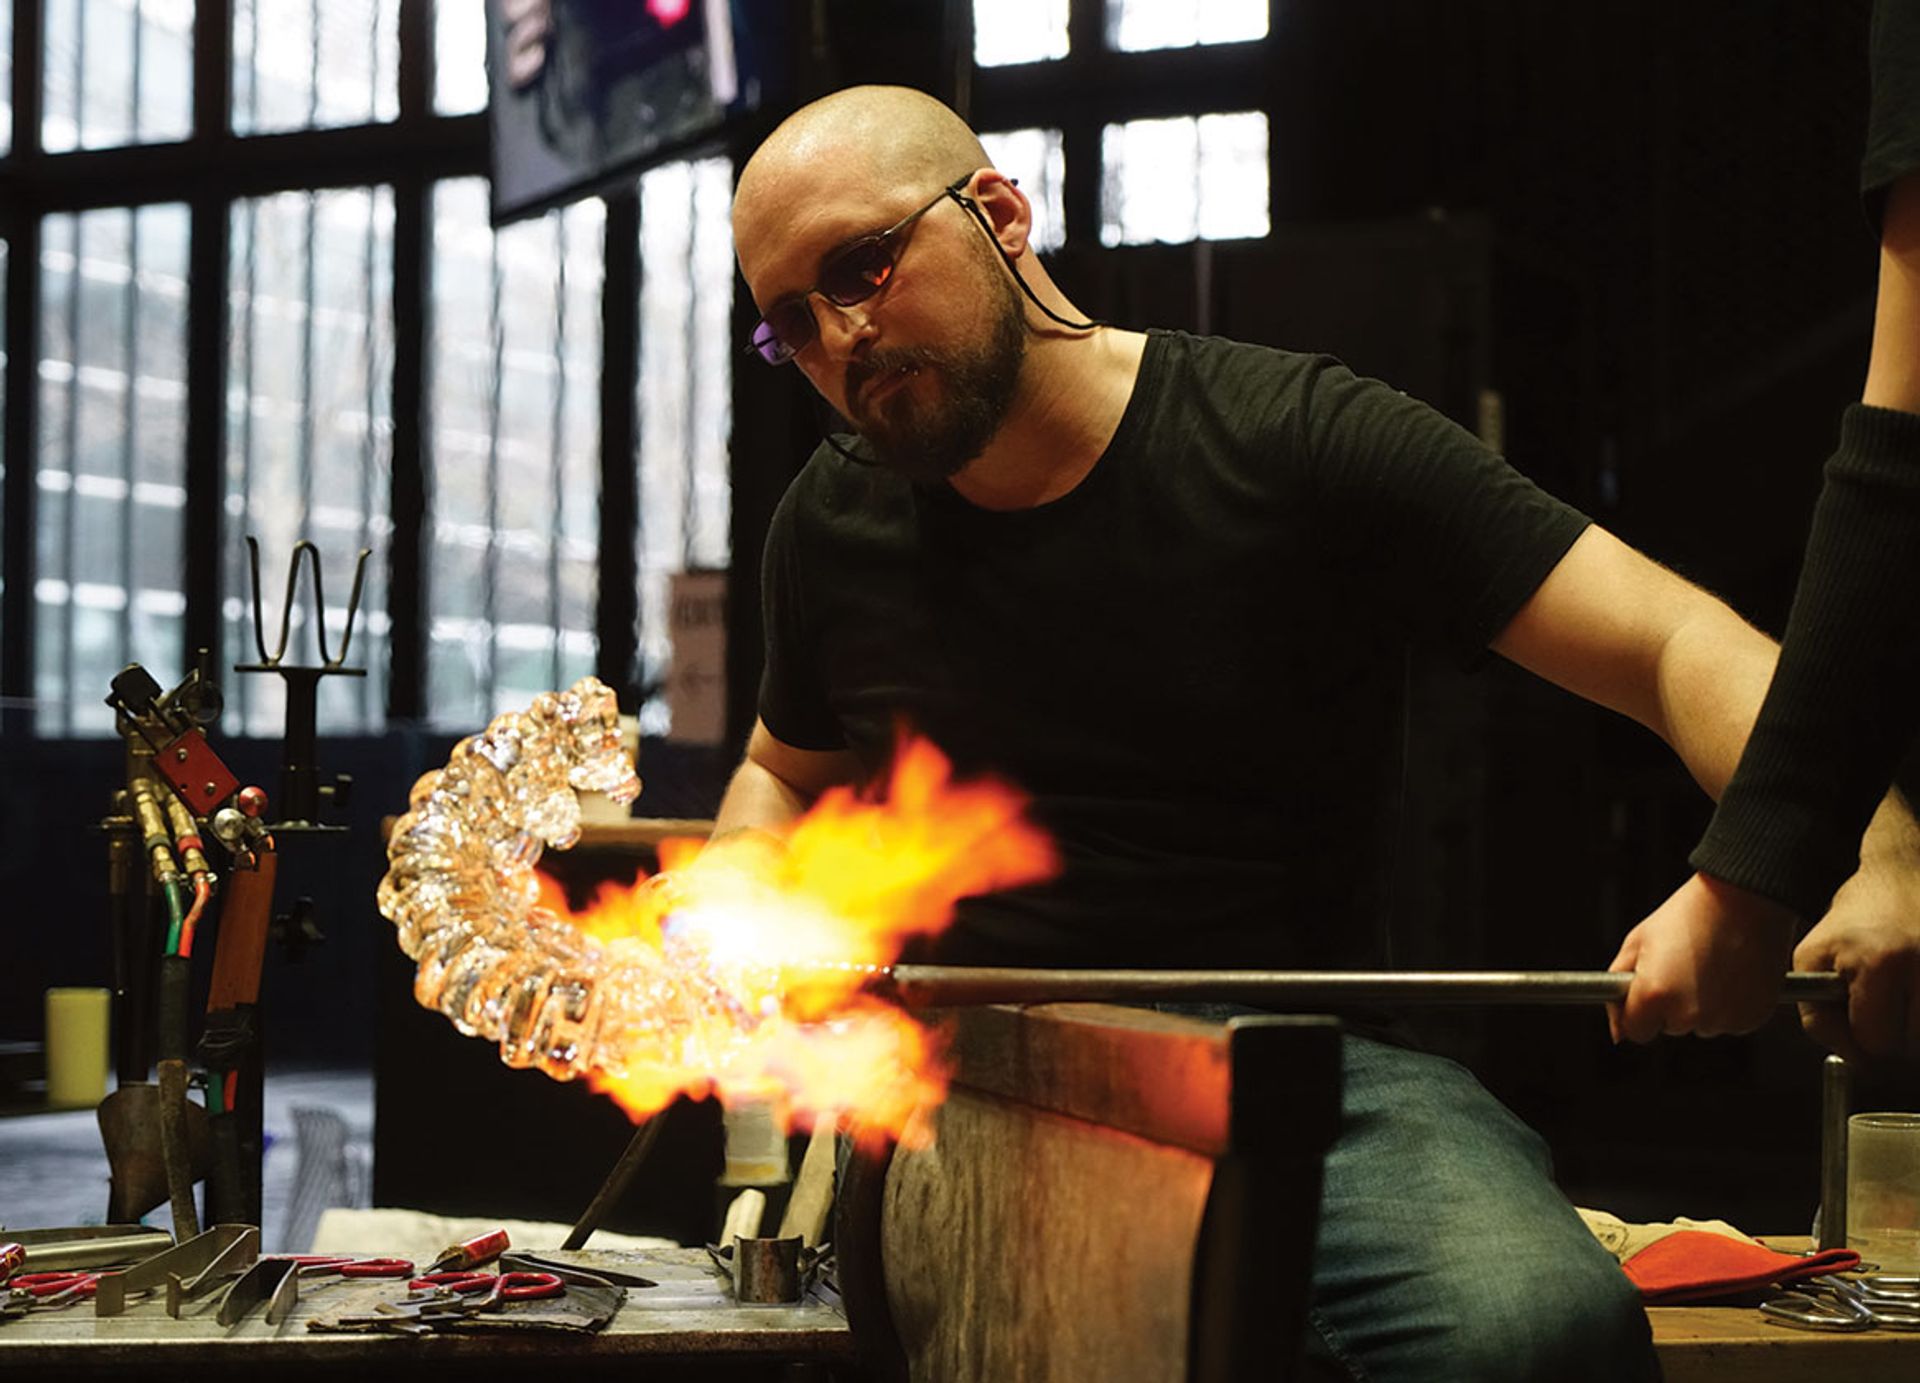 Elliot Walker, who won the second series of the Netflix series Blown Away, works on a creation at the Corning Museum Courtesy of Corning Museum of Glass